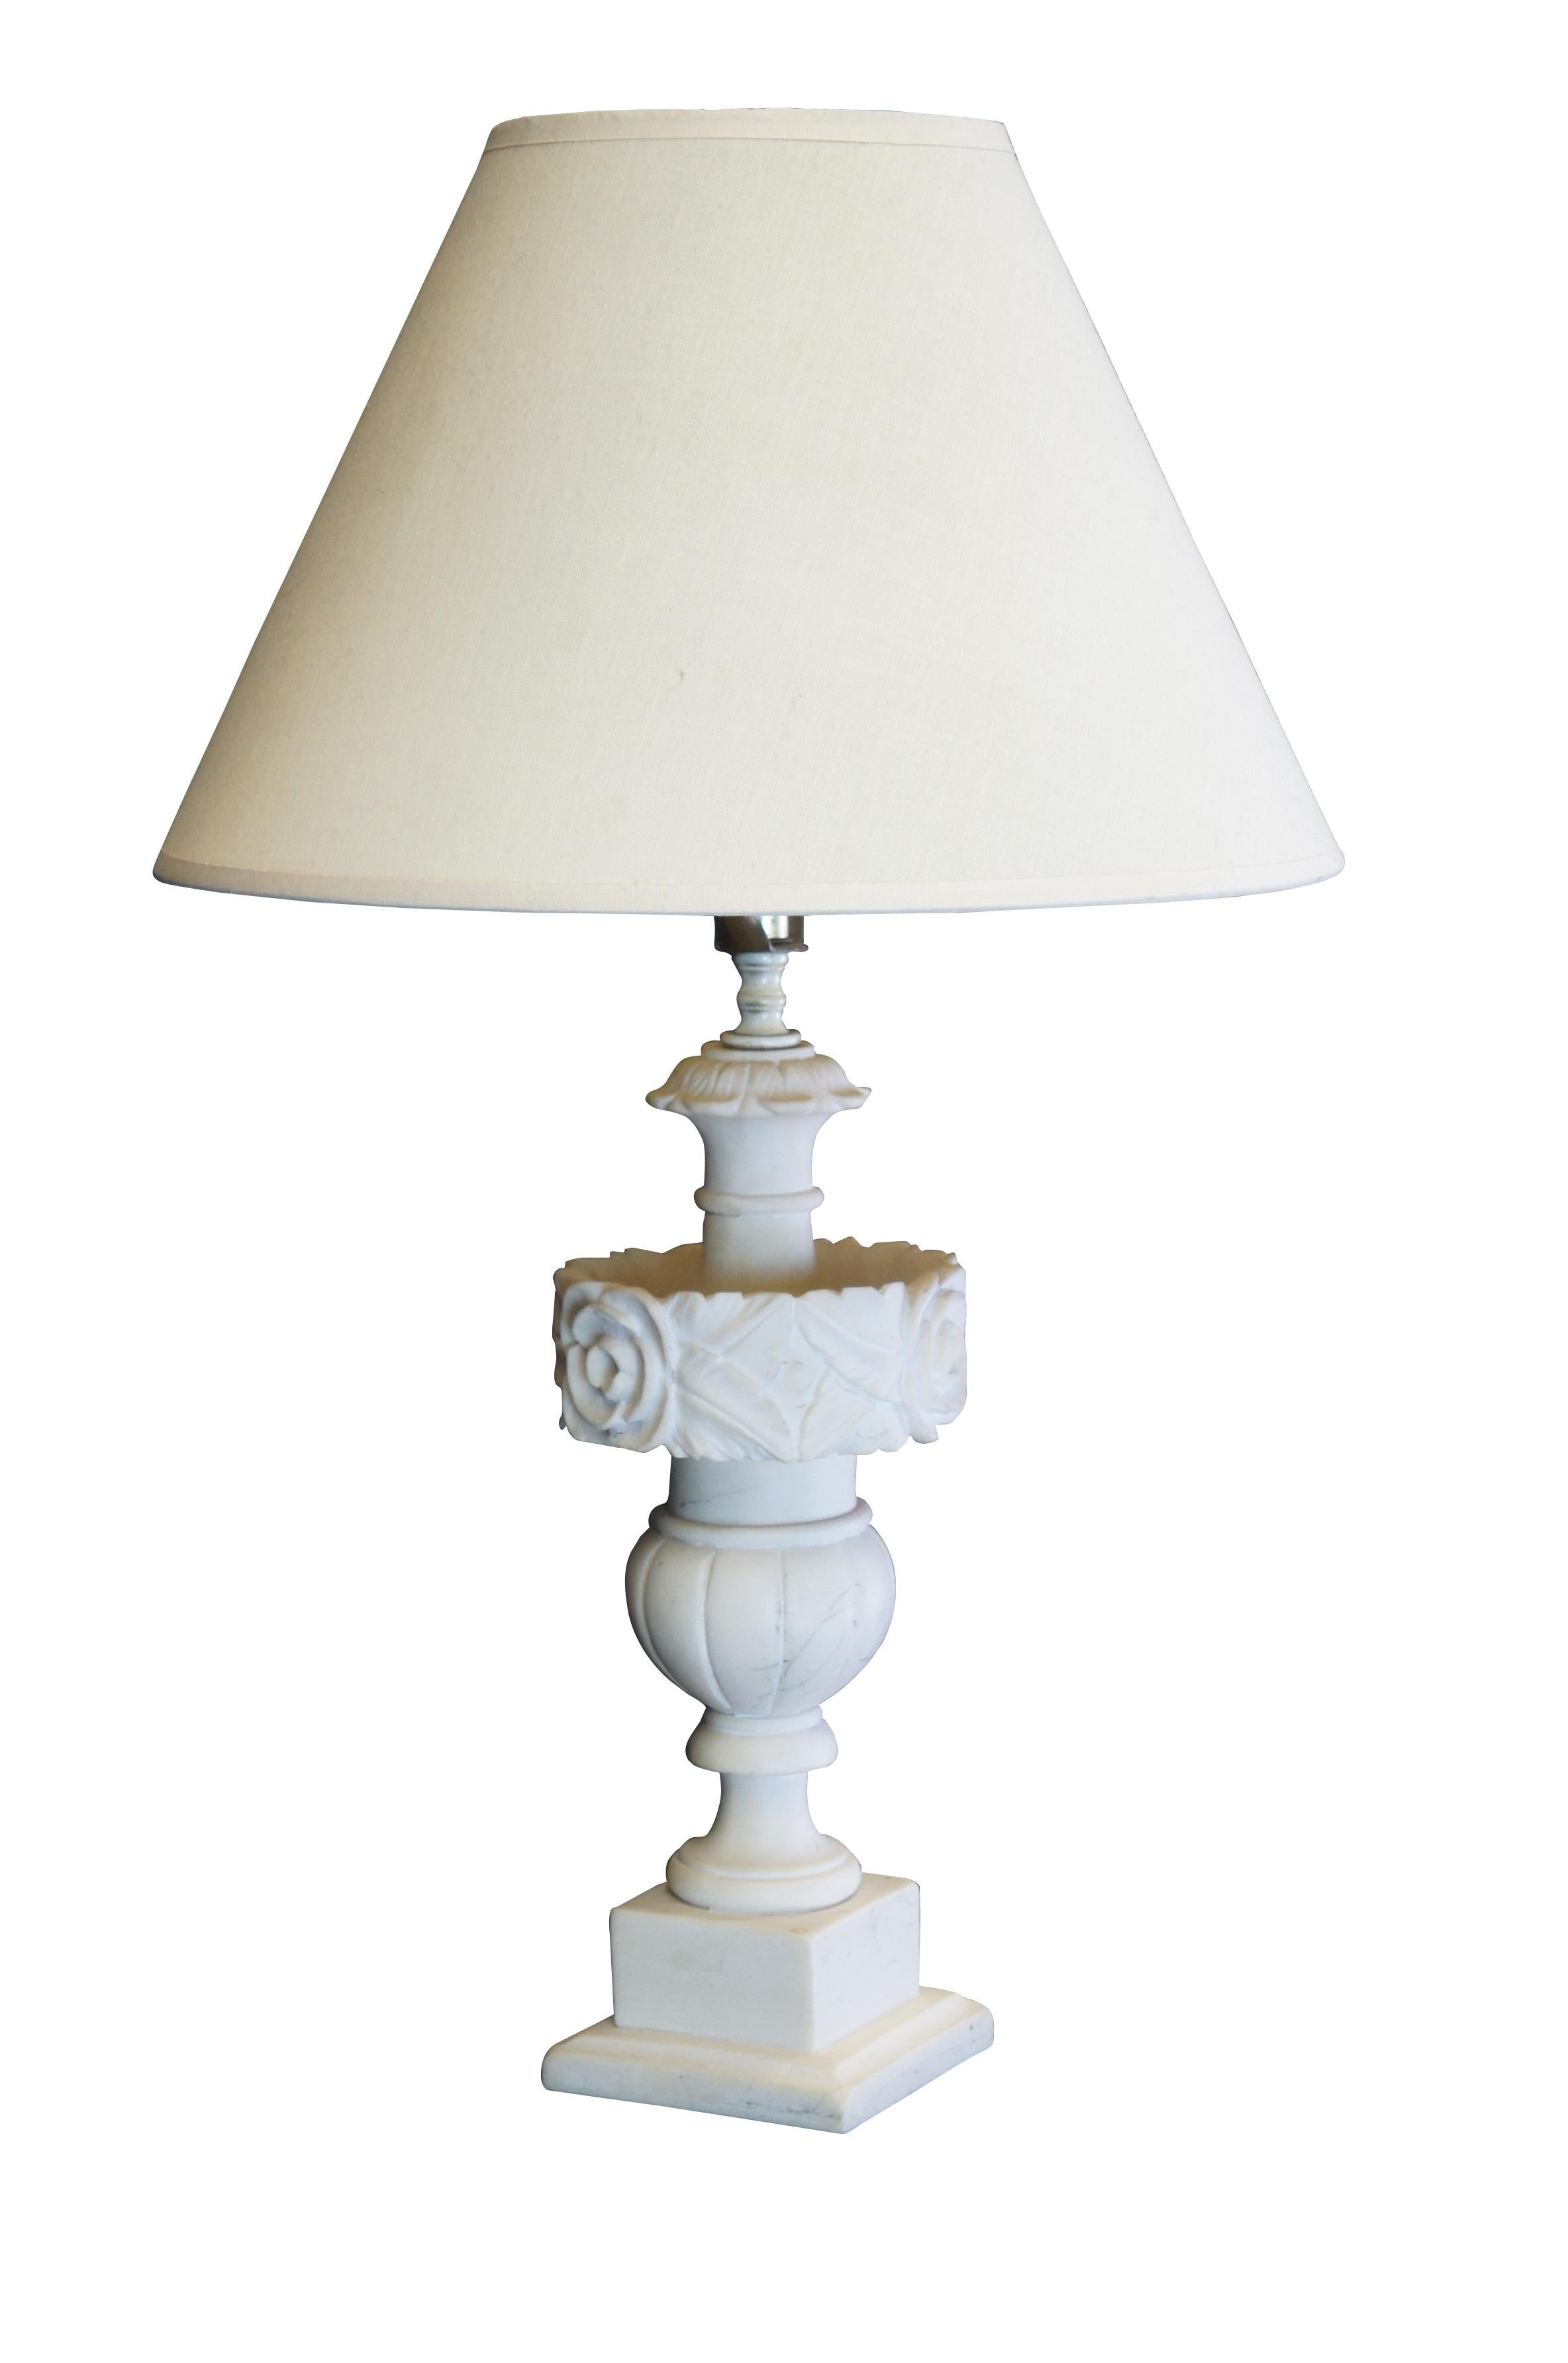 Lovely 20th century Italian carved alabaster table lamp.  Features an urn shape with floral carvings at the center.  Includes Shade.  

Dimensions: 
13